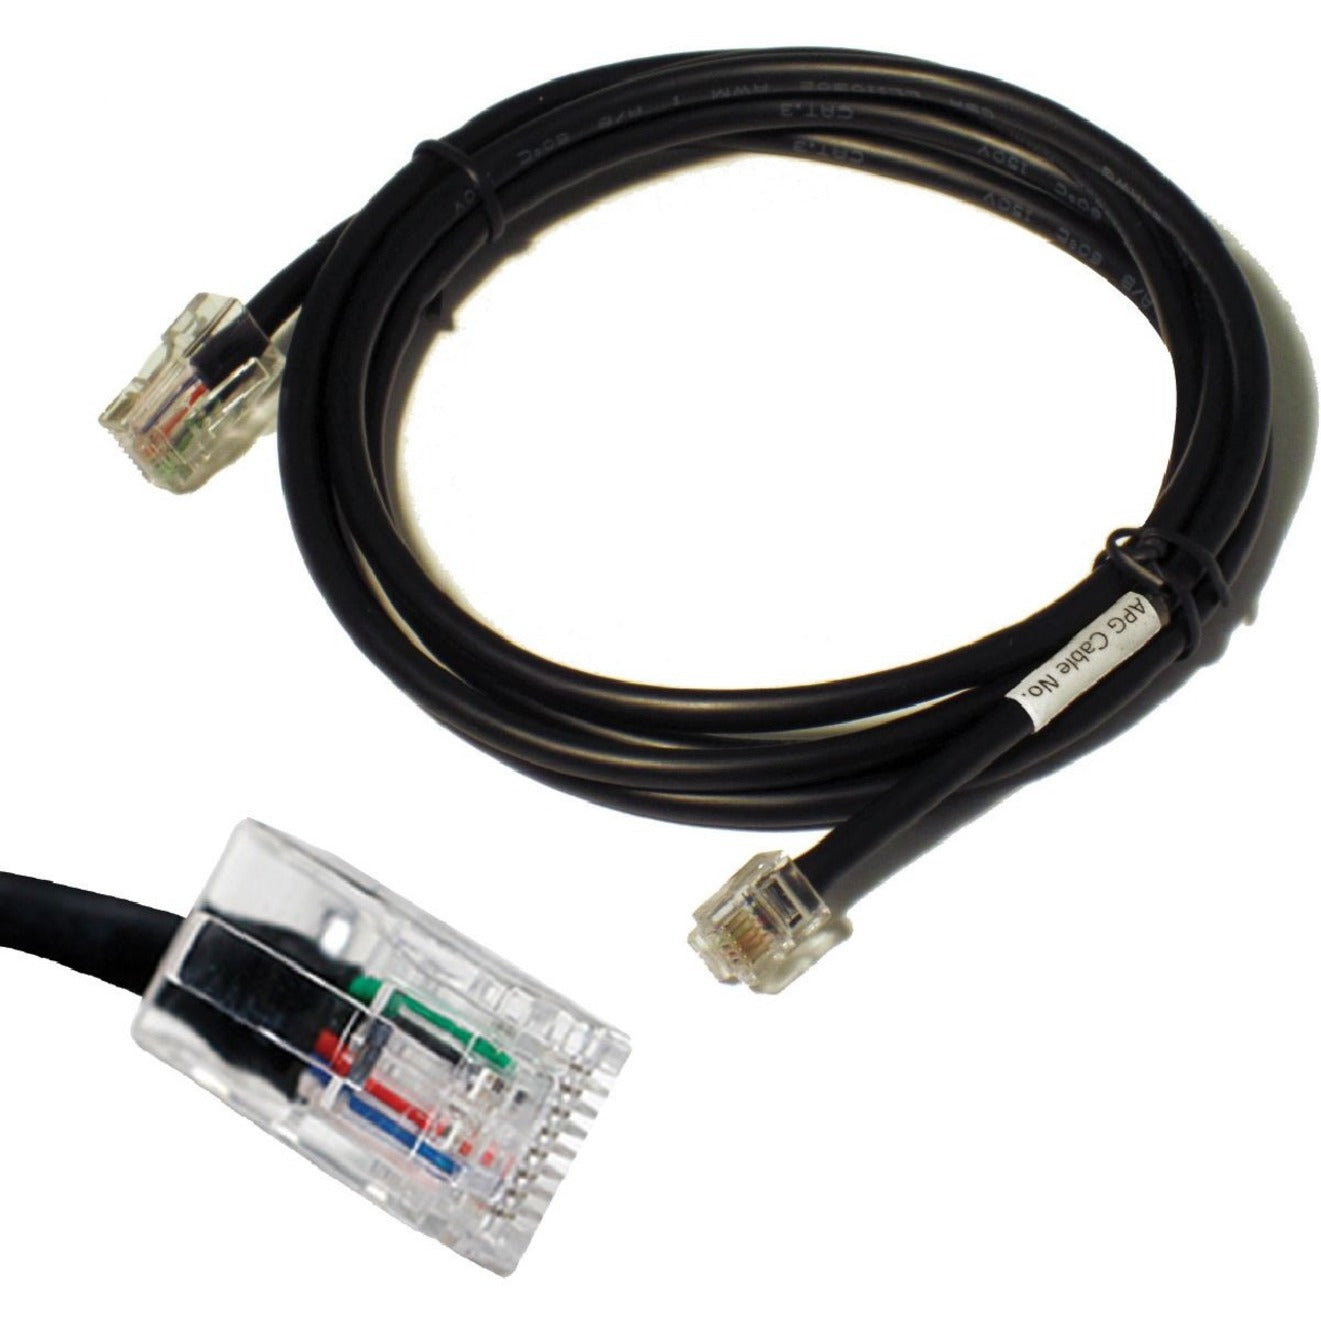 APG CD-101A RJ-12/RJ-45 Data Transfer Cable, 5 ft, Copper Conductor